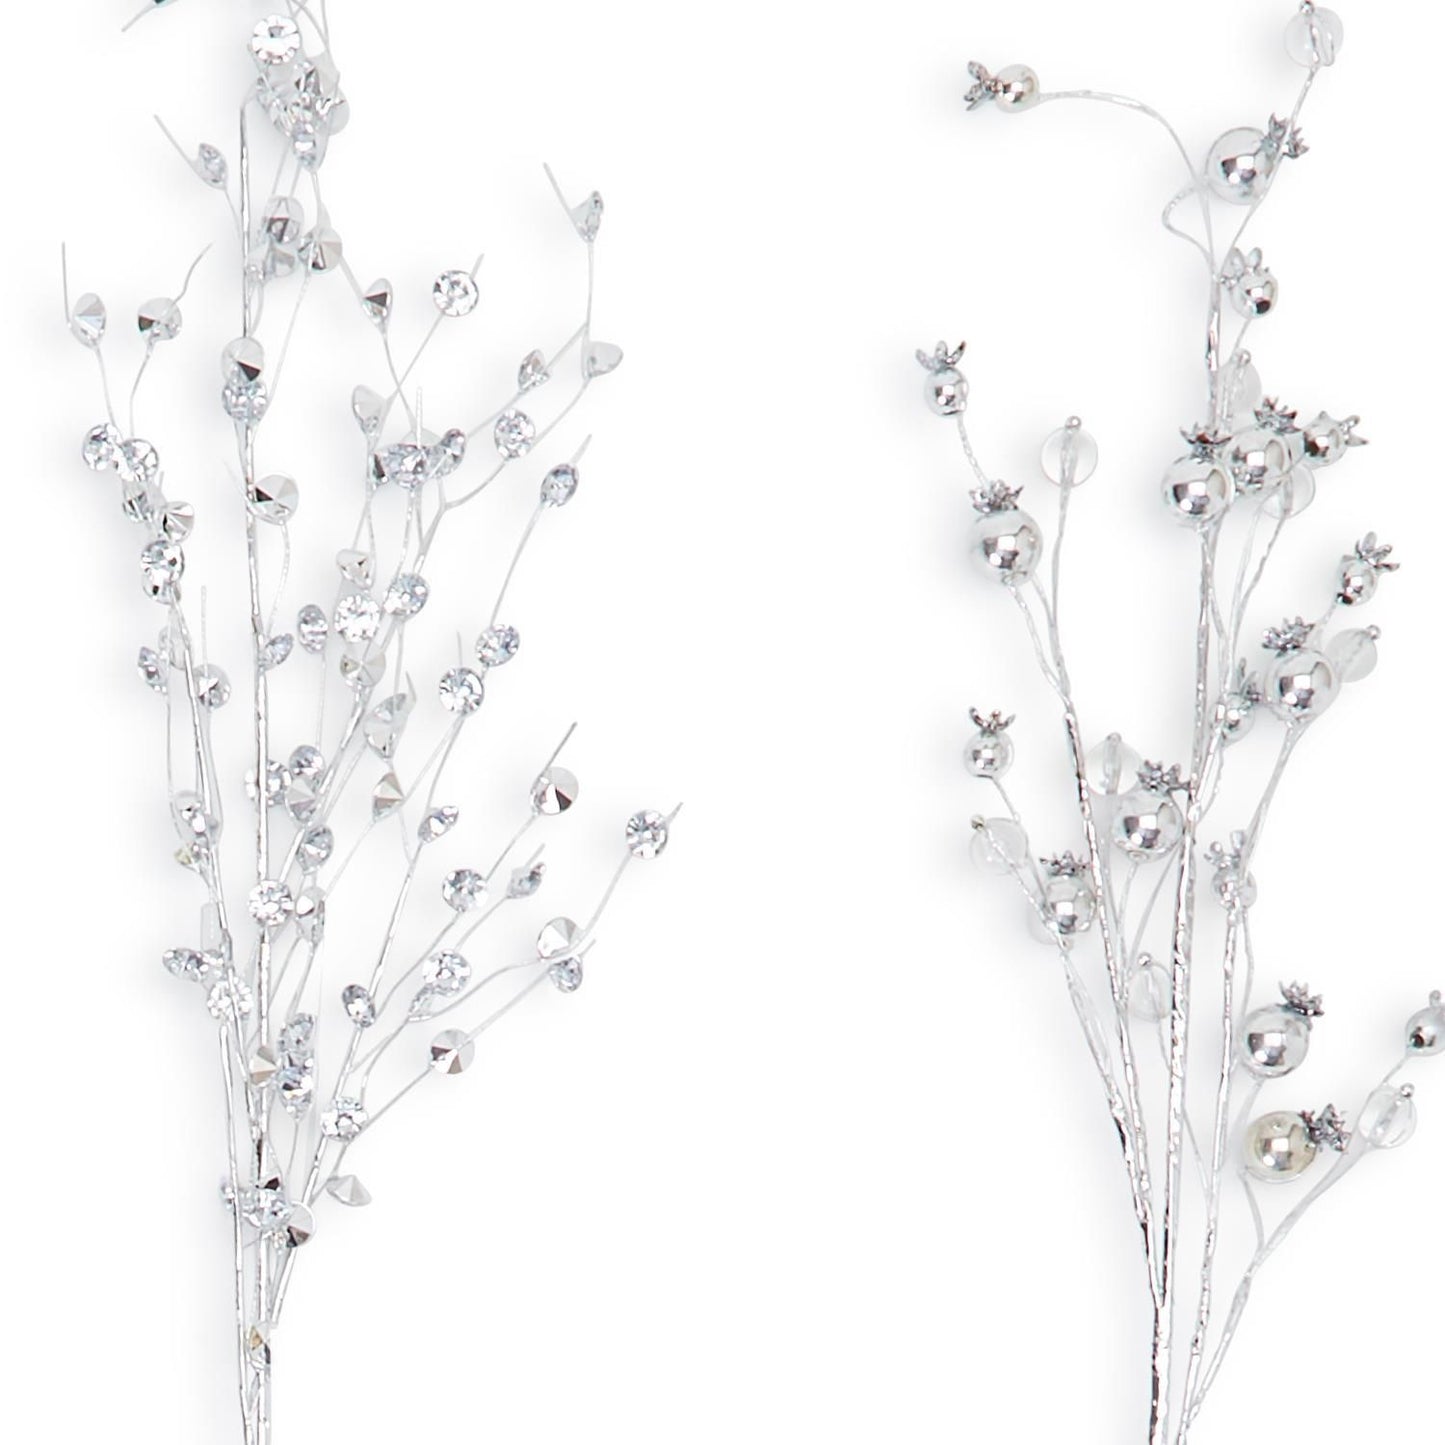 Crystals And Berries 24-Piece Hand-Crafted Metallic Floral Stem in 2 Styles Each